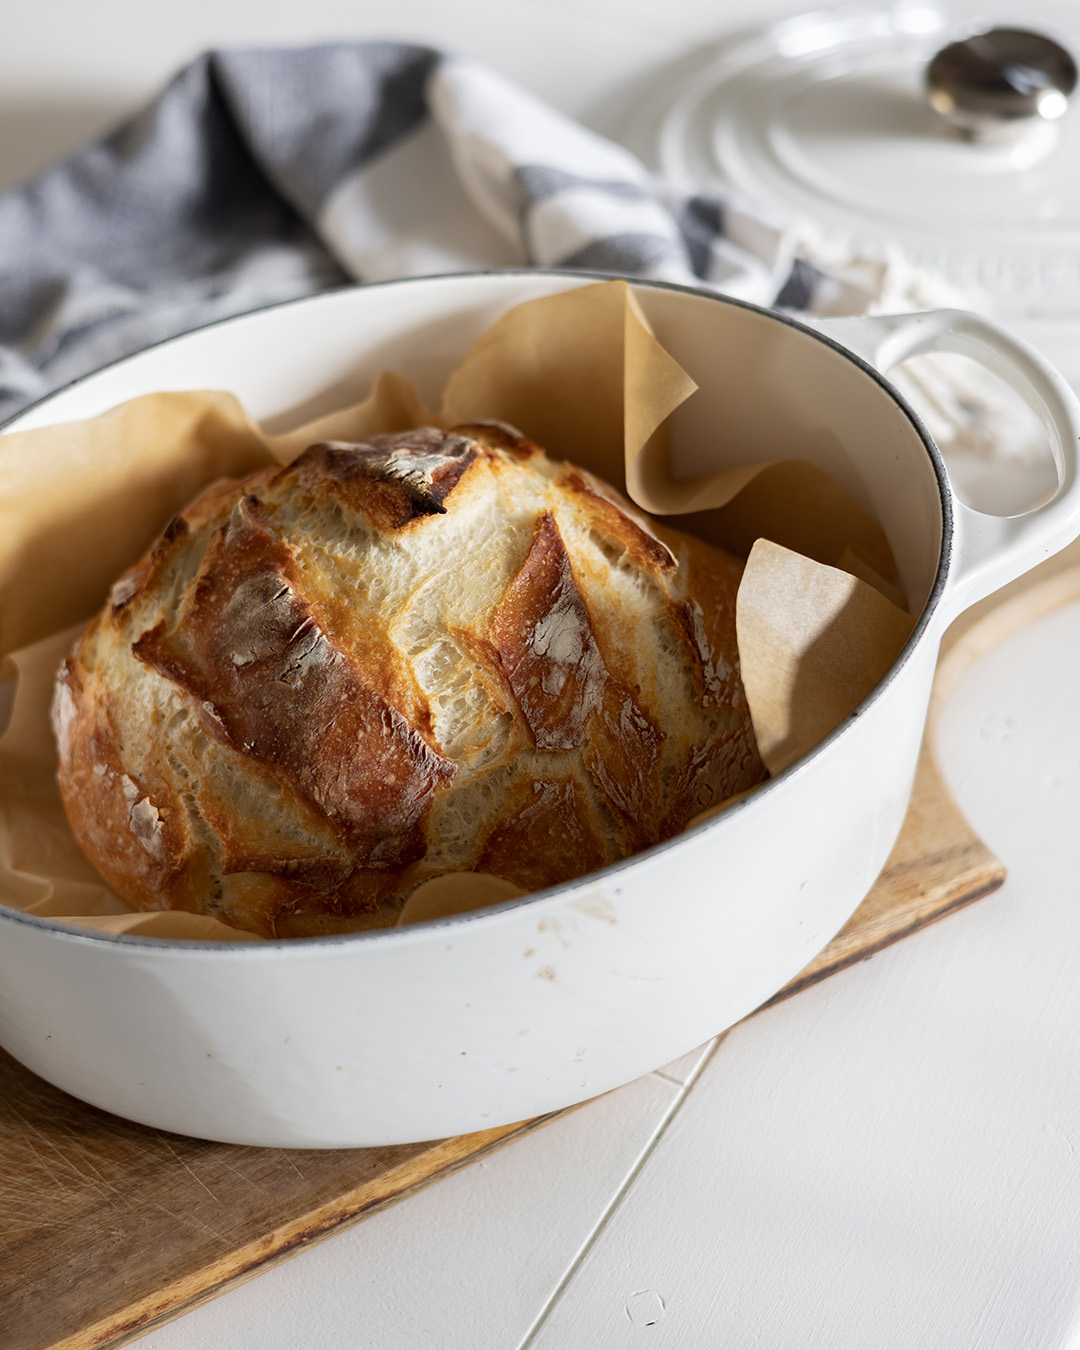 This Le Creuset overnight artisan bread recipe is the perfect homemade bread recipe for beginners and seasoned bakers as well! So simple, and so easy, but really makes you feel like you've accomplished something special. :)